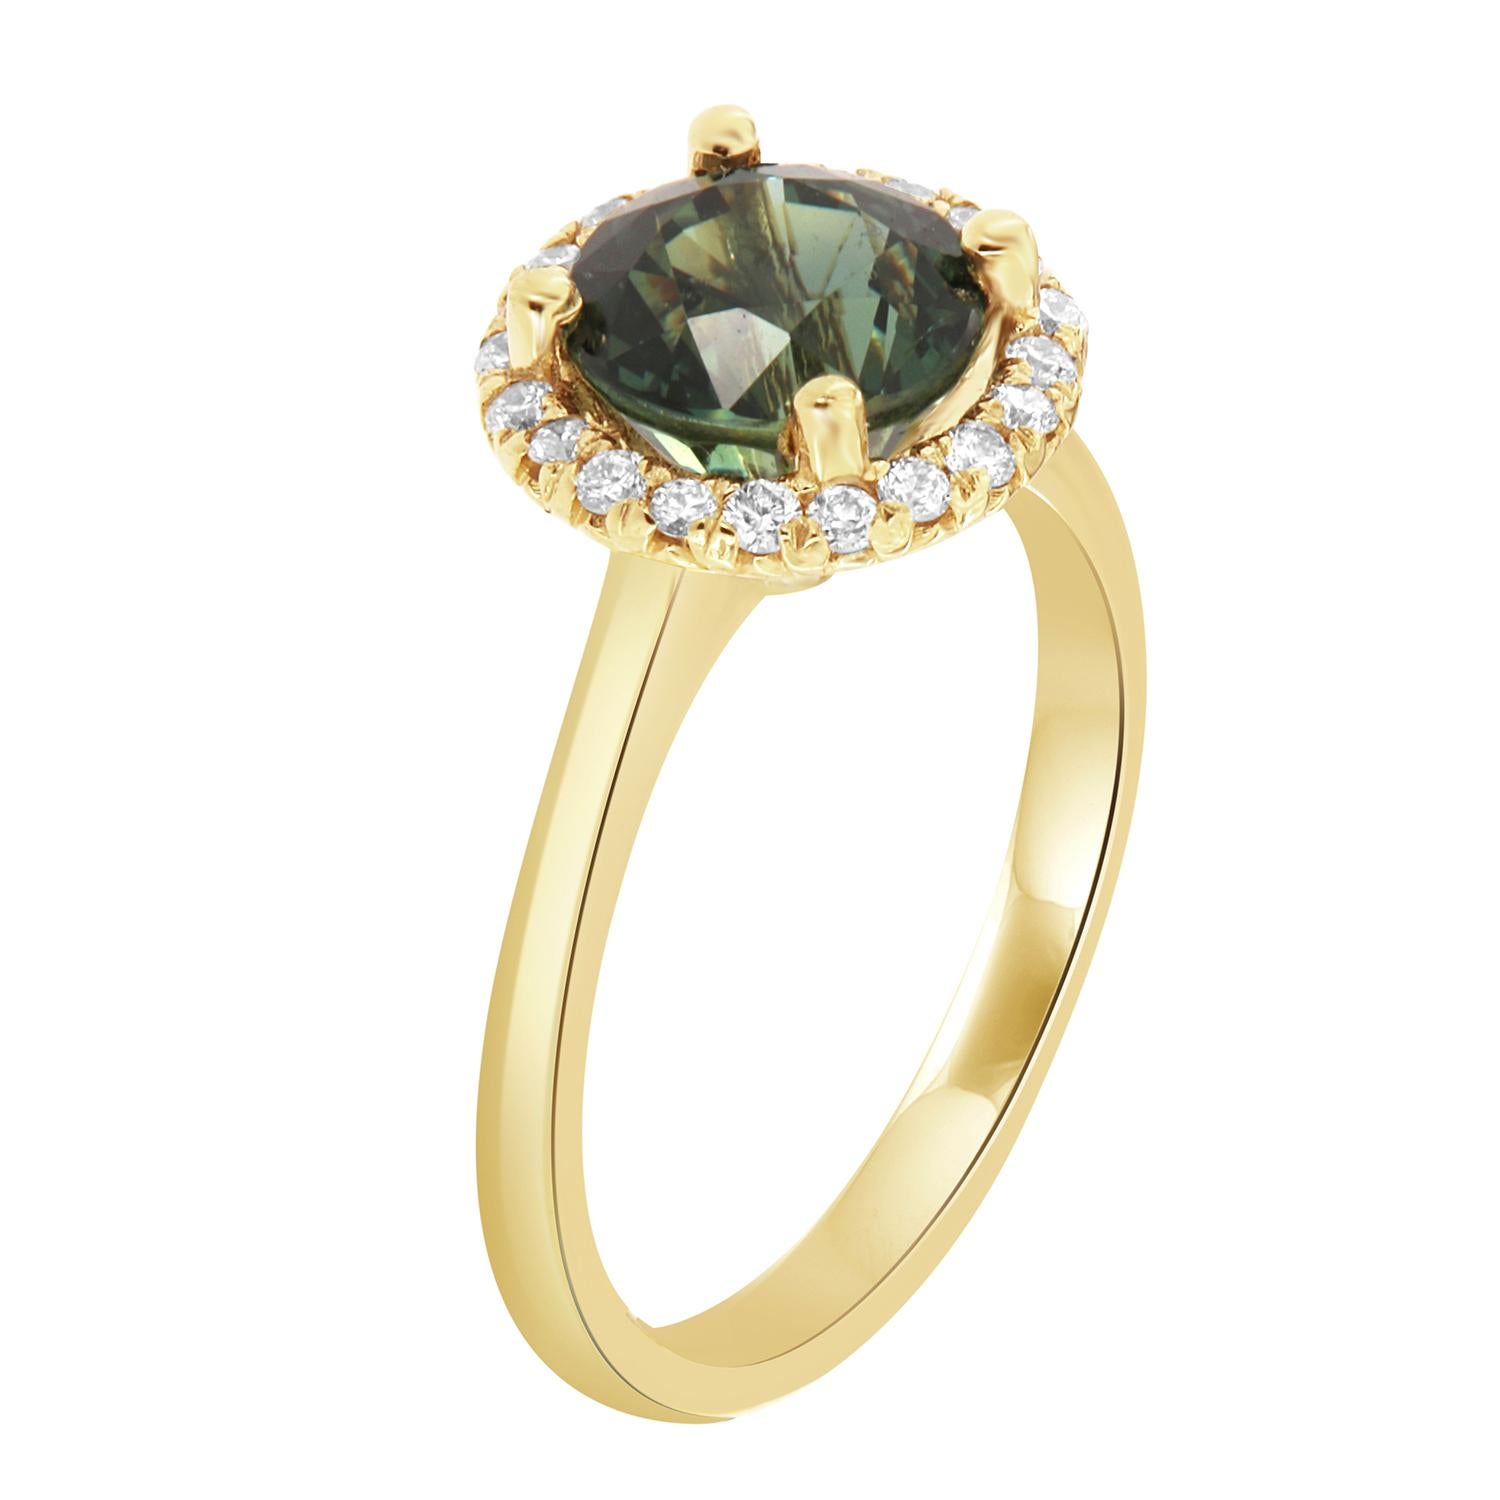 This 18k yellow gold ring features a rare none-heated GIA Certified 2.07 round-shaped Natural Sapphire in vibrant Teal color ( Greenish- Blue) with an excellent luster, encircled by a halo of brilliant round diamonds on a 1.8 mm wide band. 
The